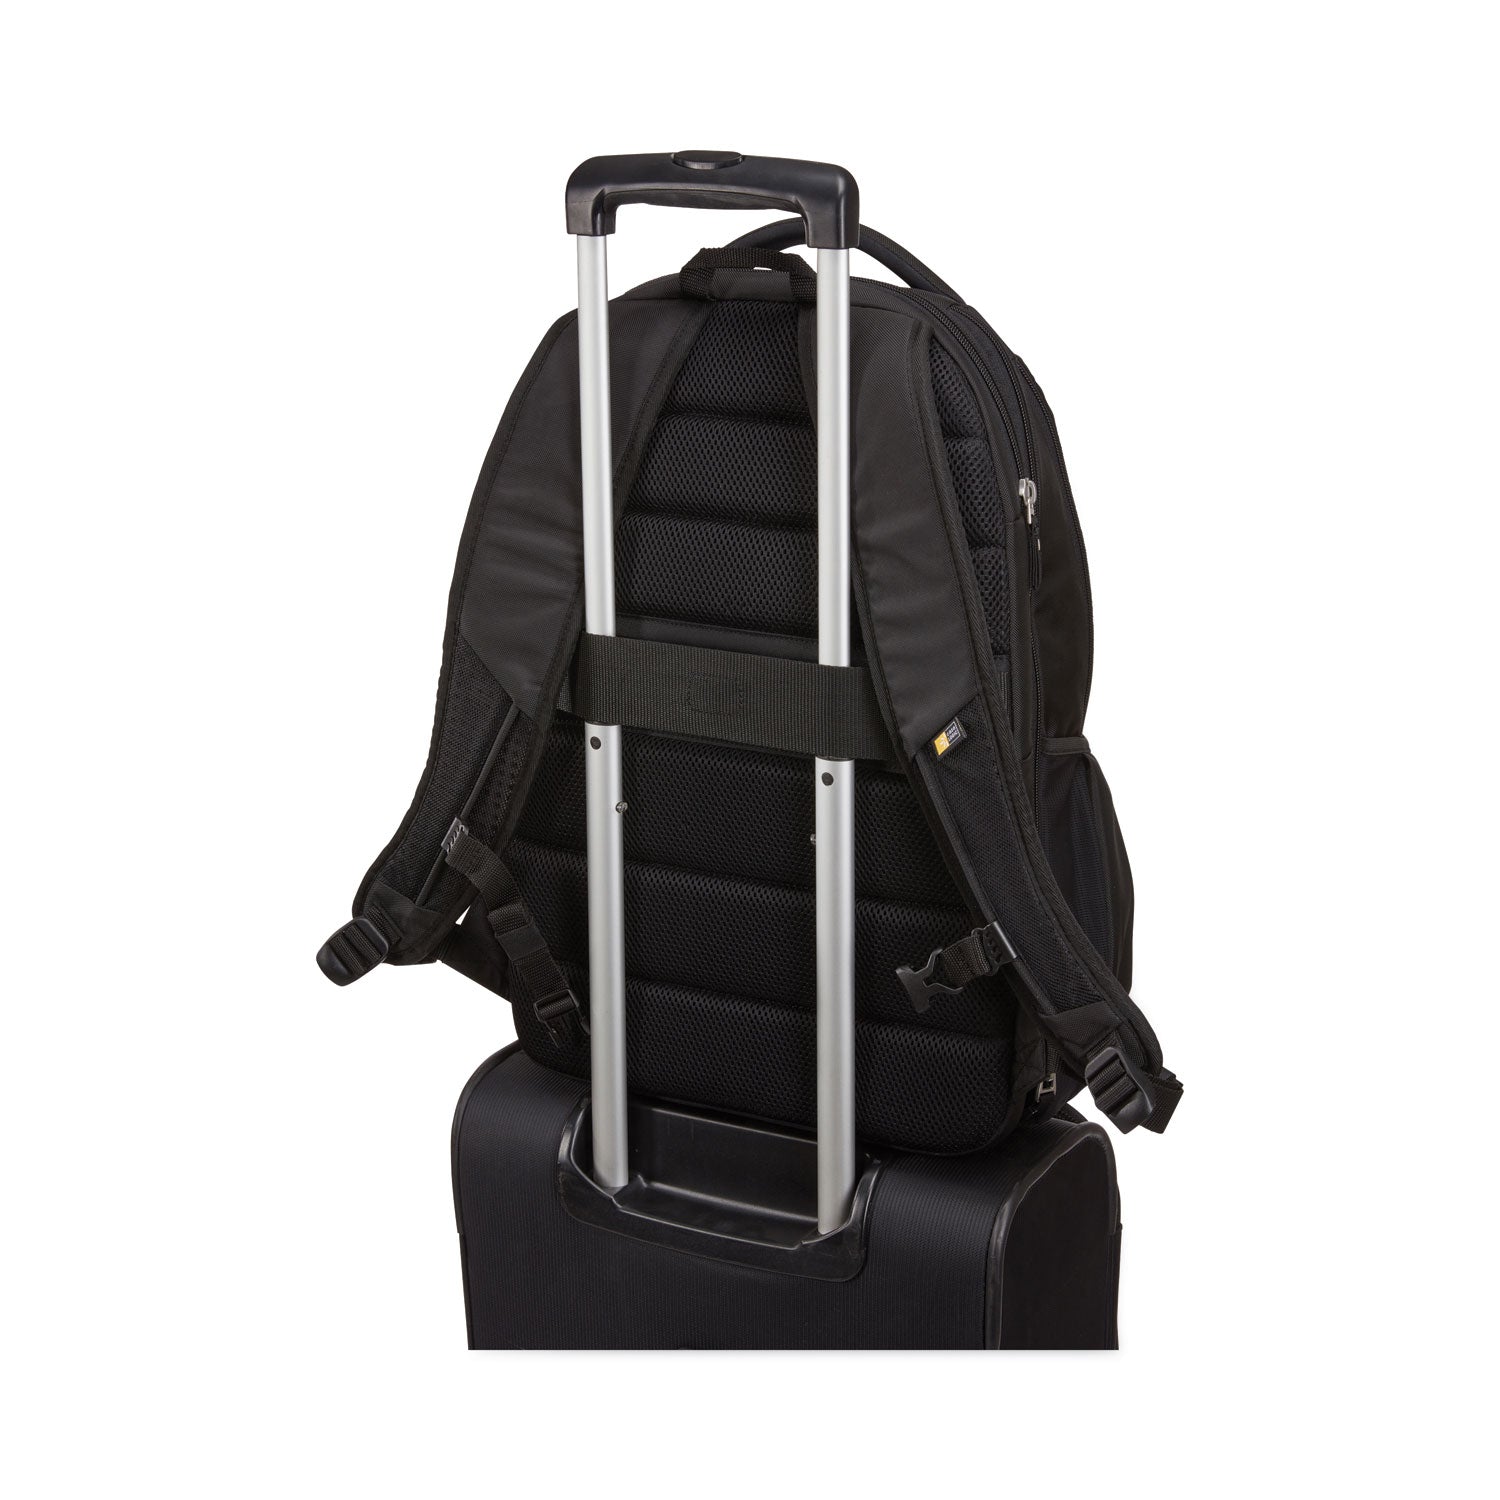 checkpoint-friendly-backpack-fits-devices-up-to-156-polyester-276-x-1339-x-1969-black_clg3203772 - 5